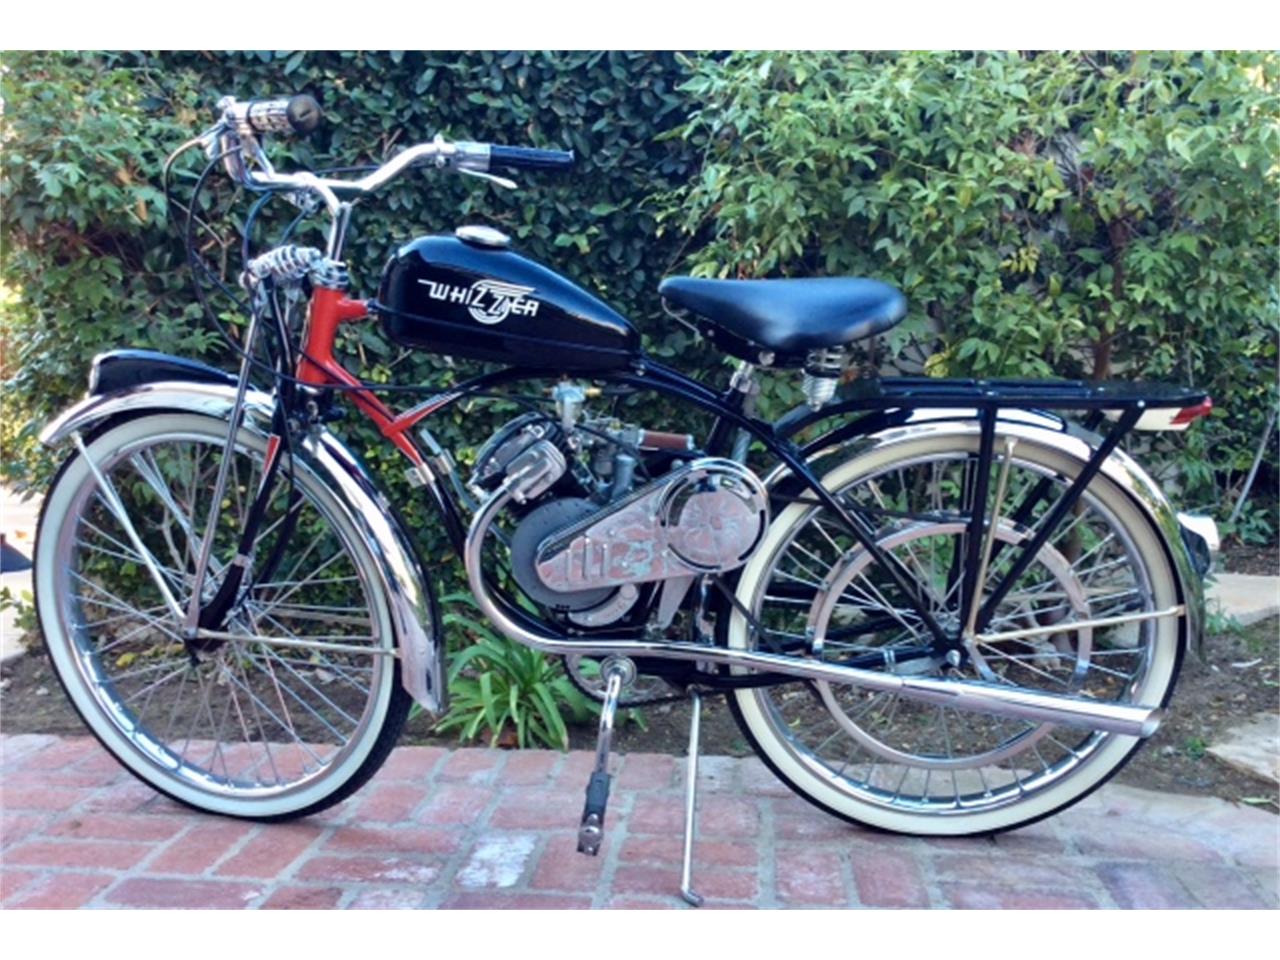 1948 Whizzer Motorcycle for Sale CC1059753